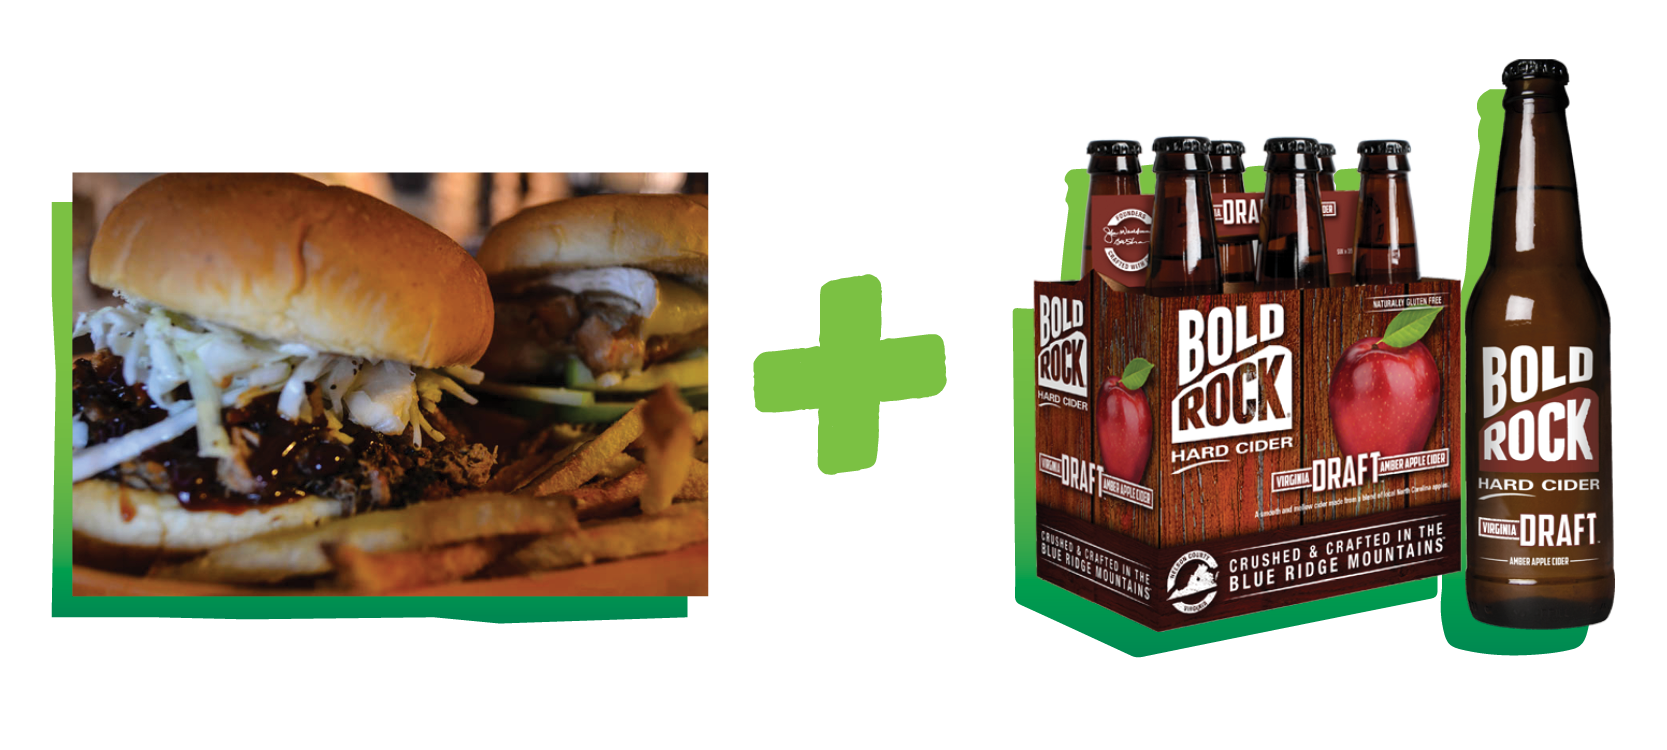 Barbecue burger paired with Virginia Draft Bold Rock